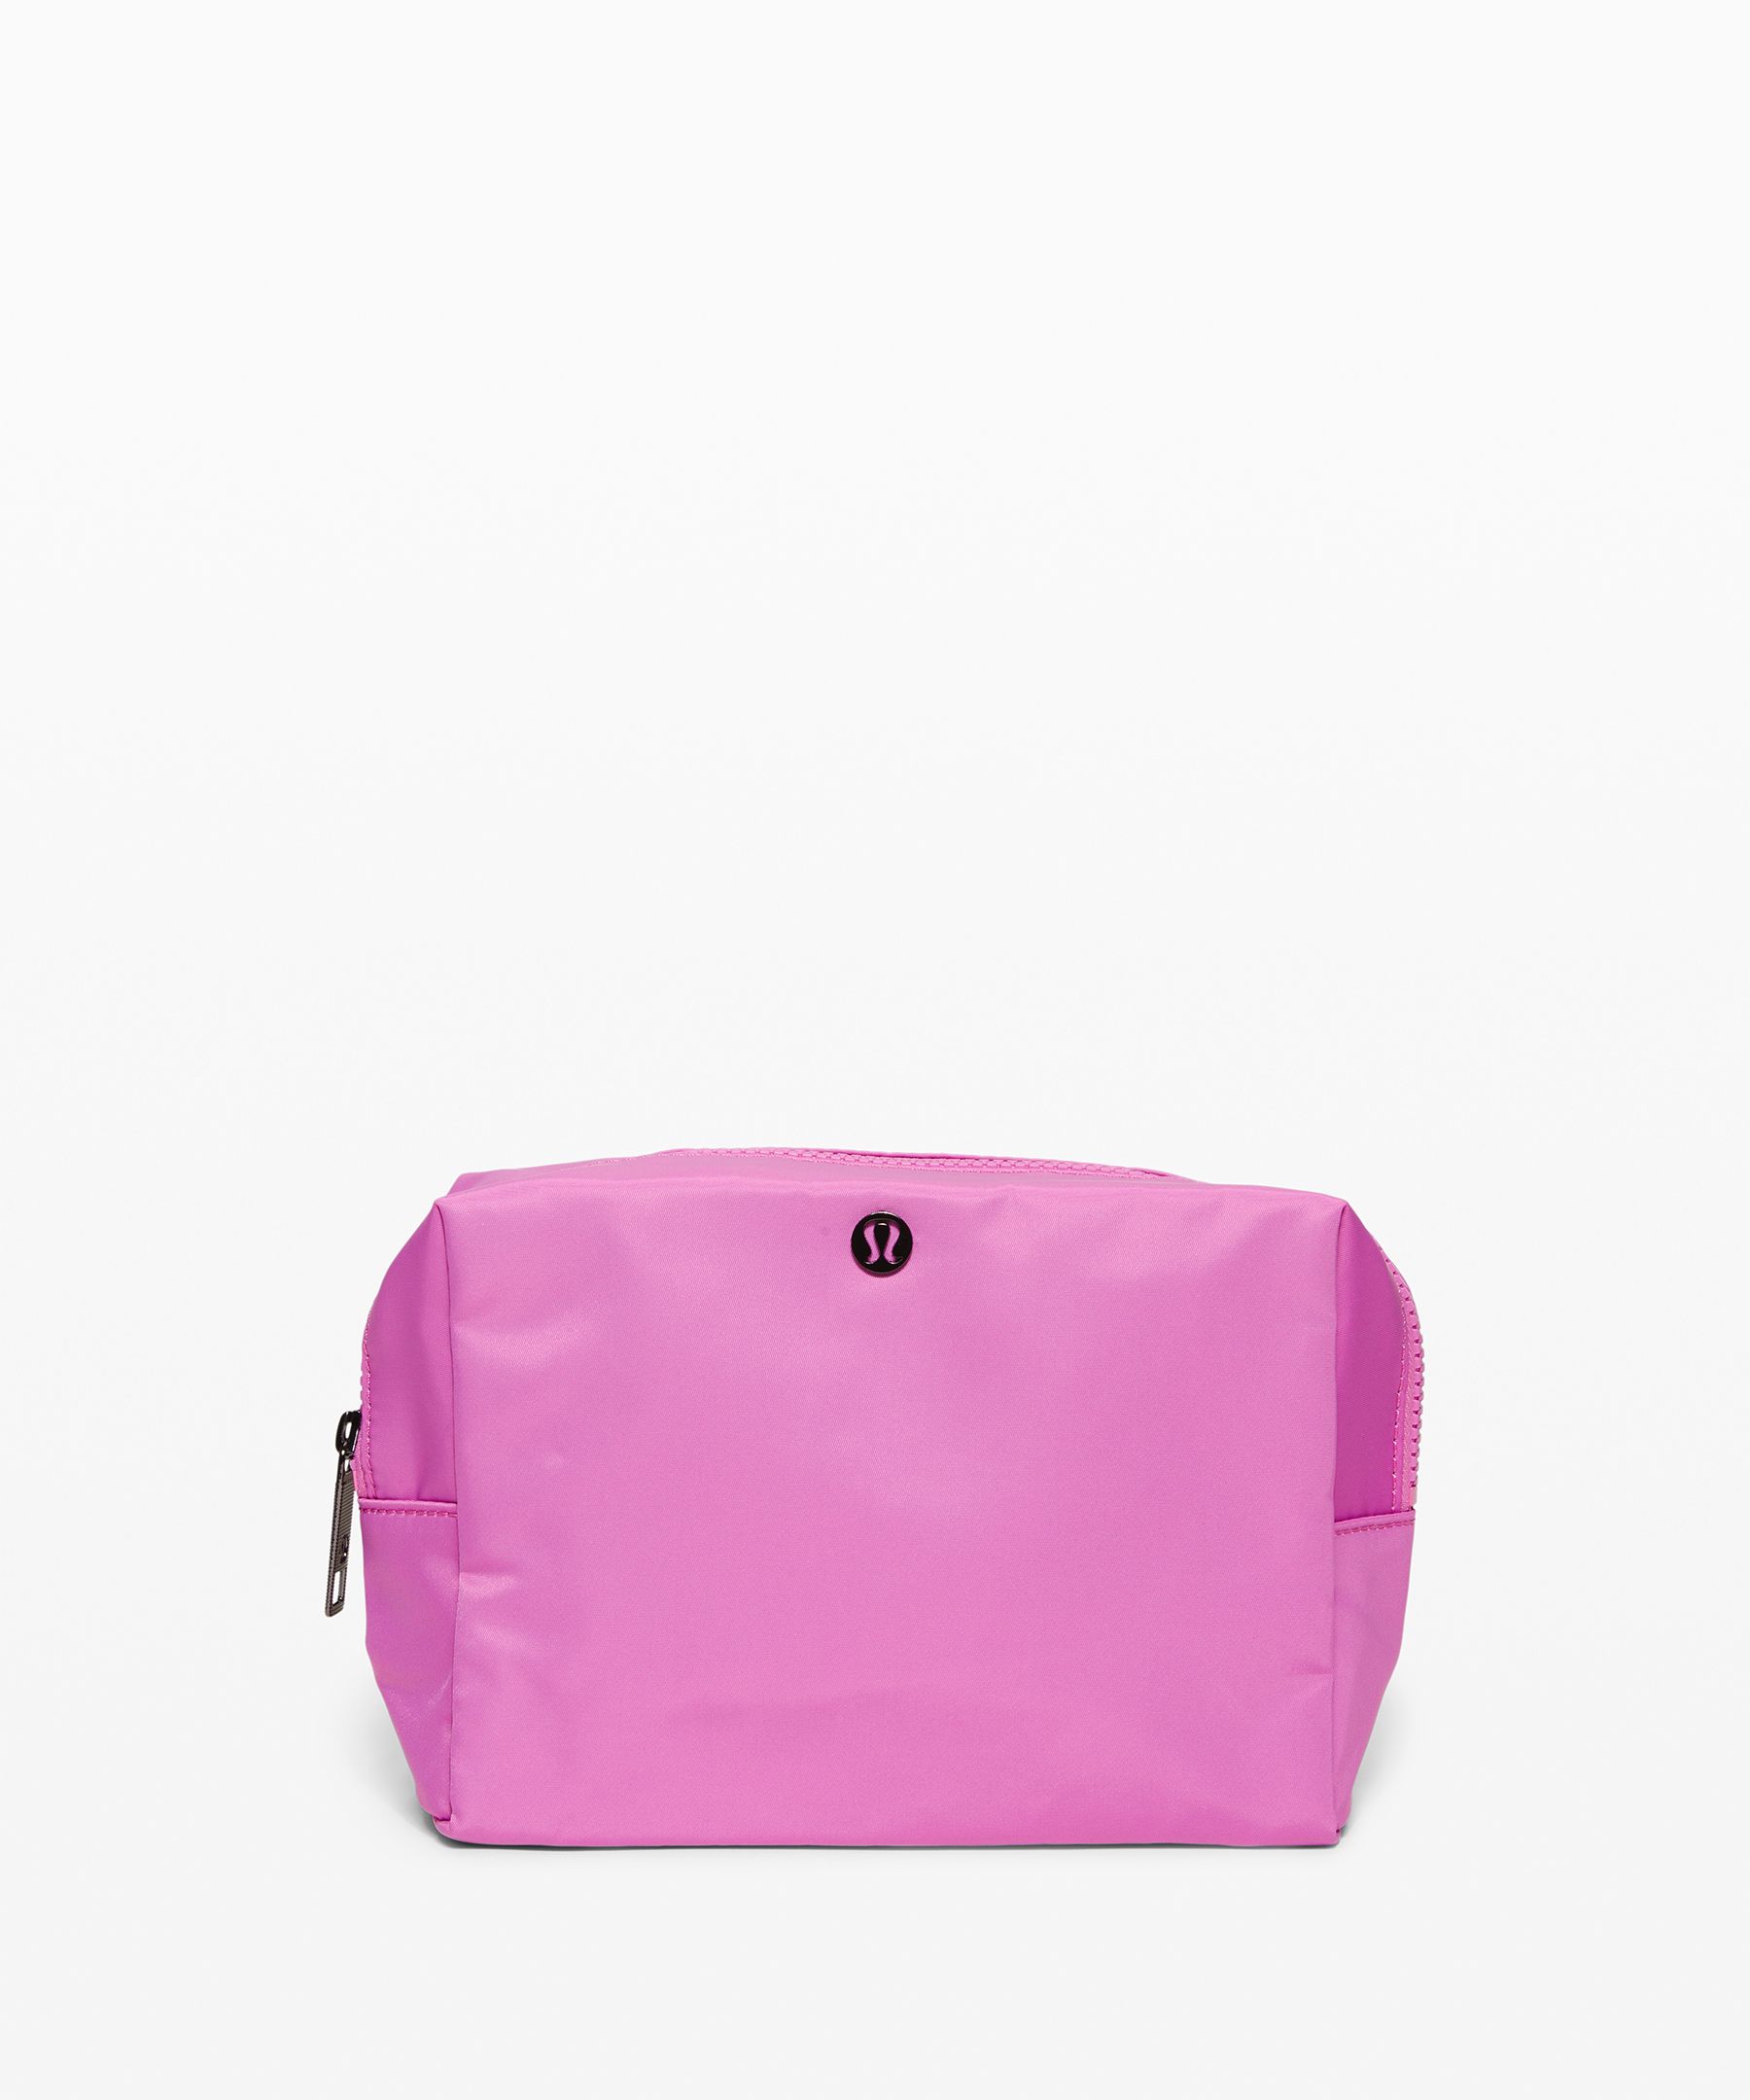 Lululemon All Your Small Things Pouch *4l In Magenta Glow